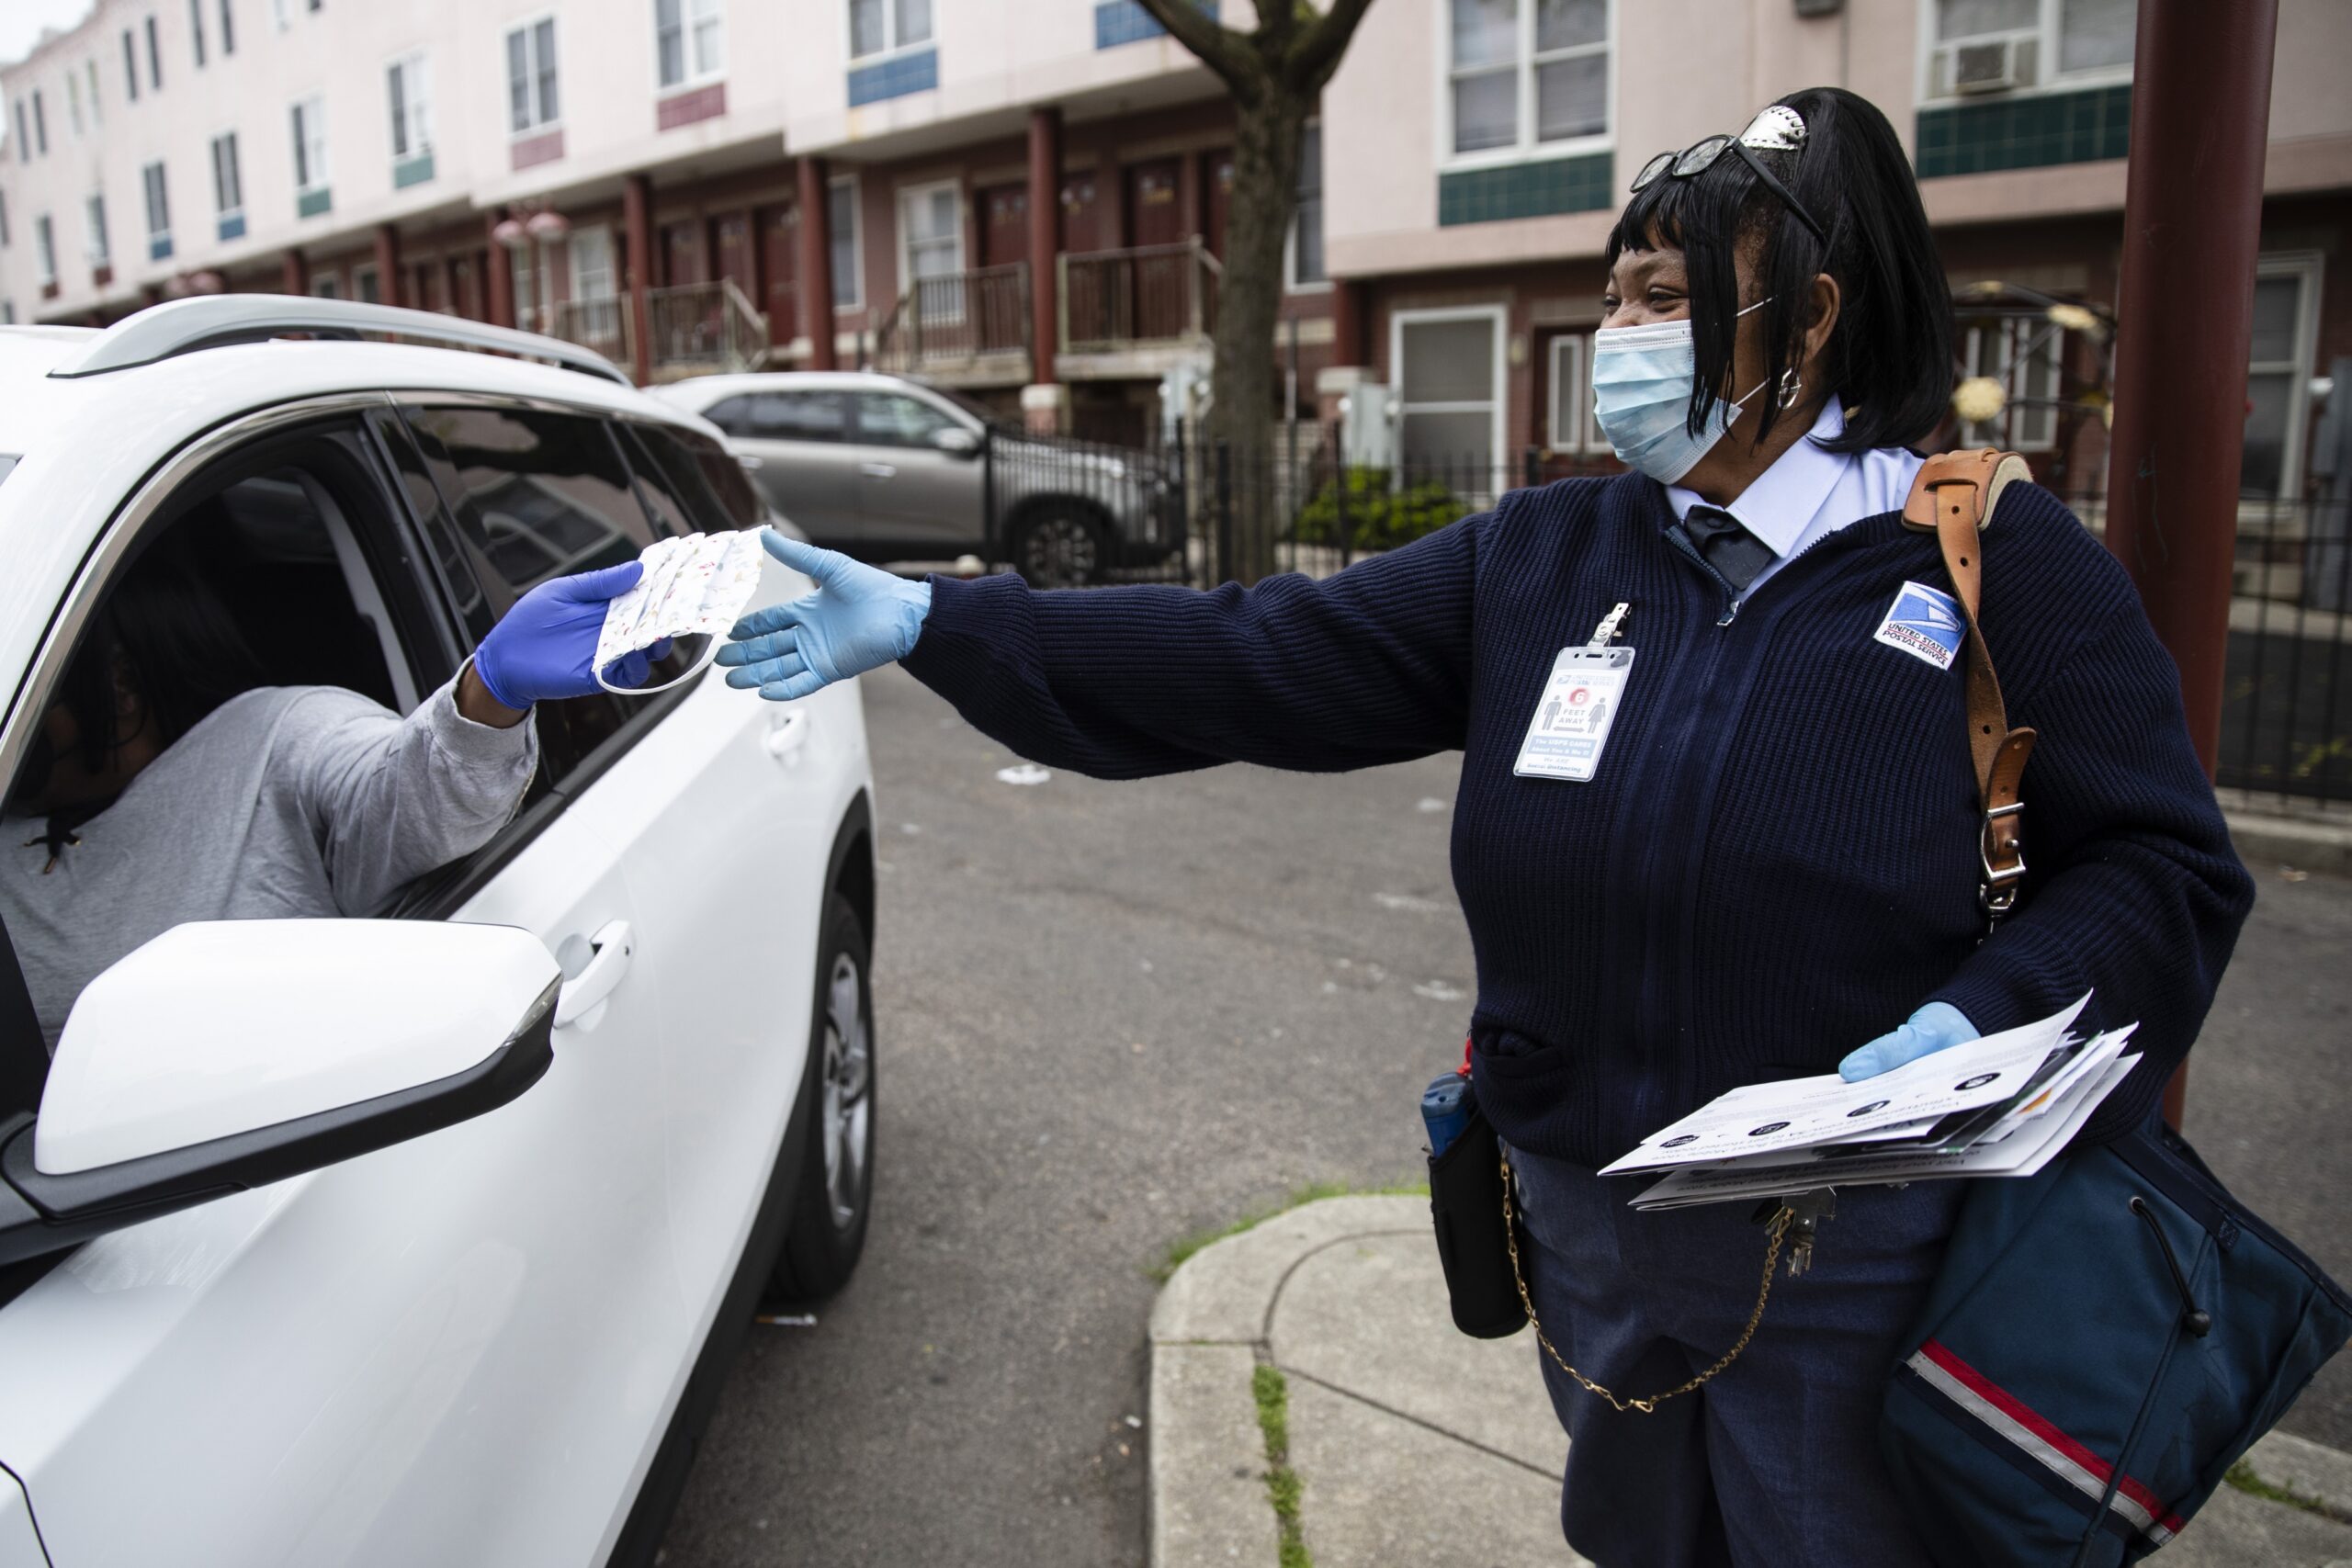 Esther Haynes, left, gives United States Postal Service carrier Henrietta Dixon a protective face mask as she delivers mail